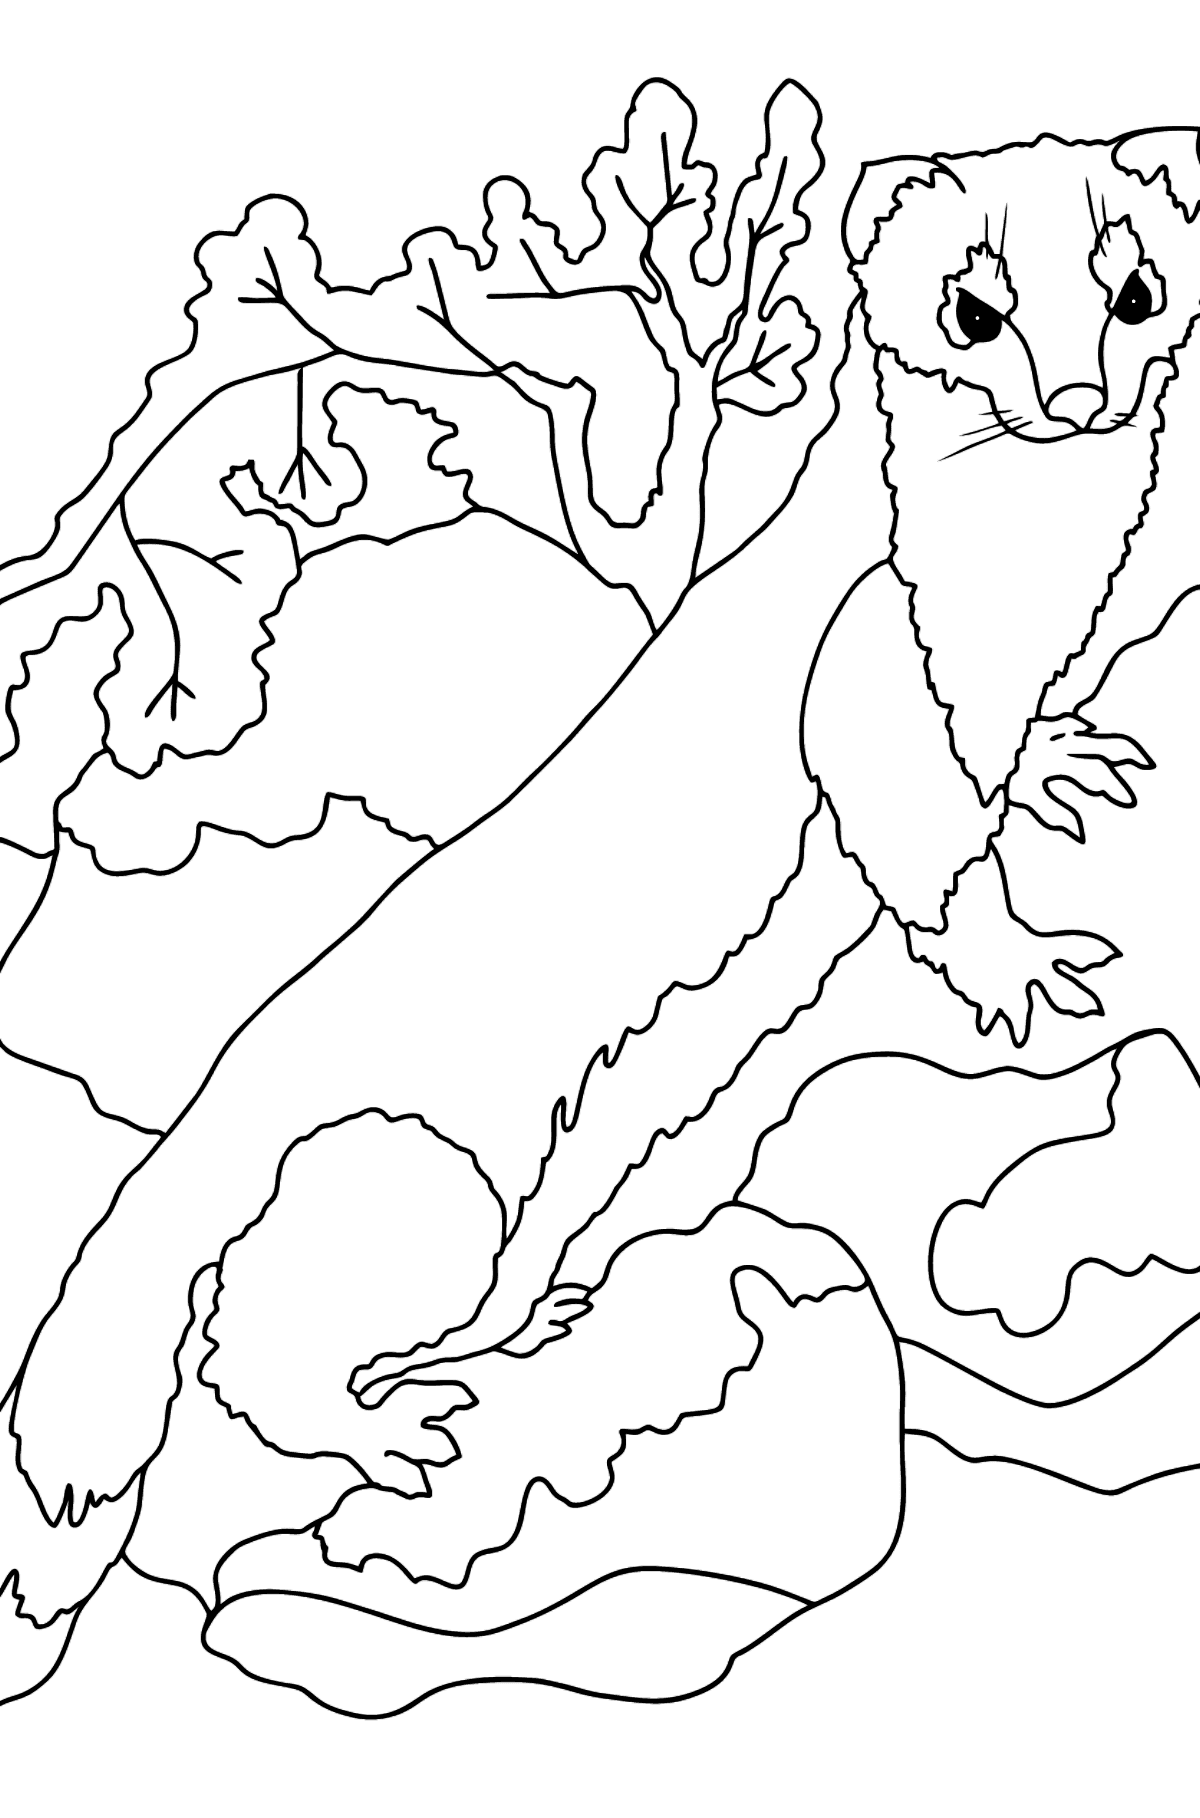 Coloring Page - An Ermine - A Sly Hunter - Coloring Pages for Kids